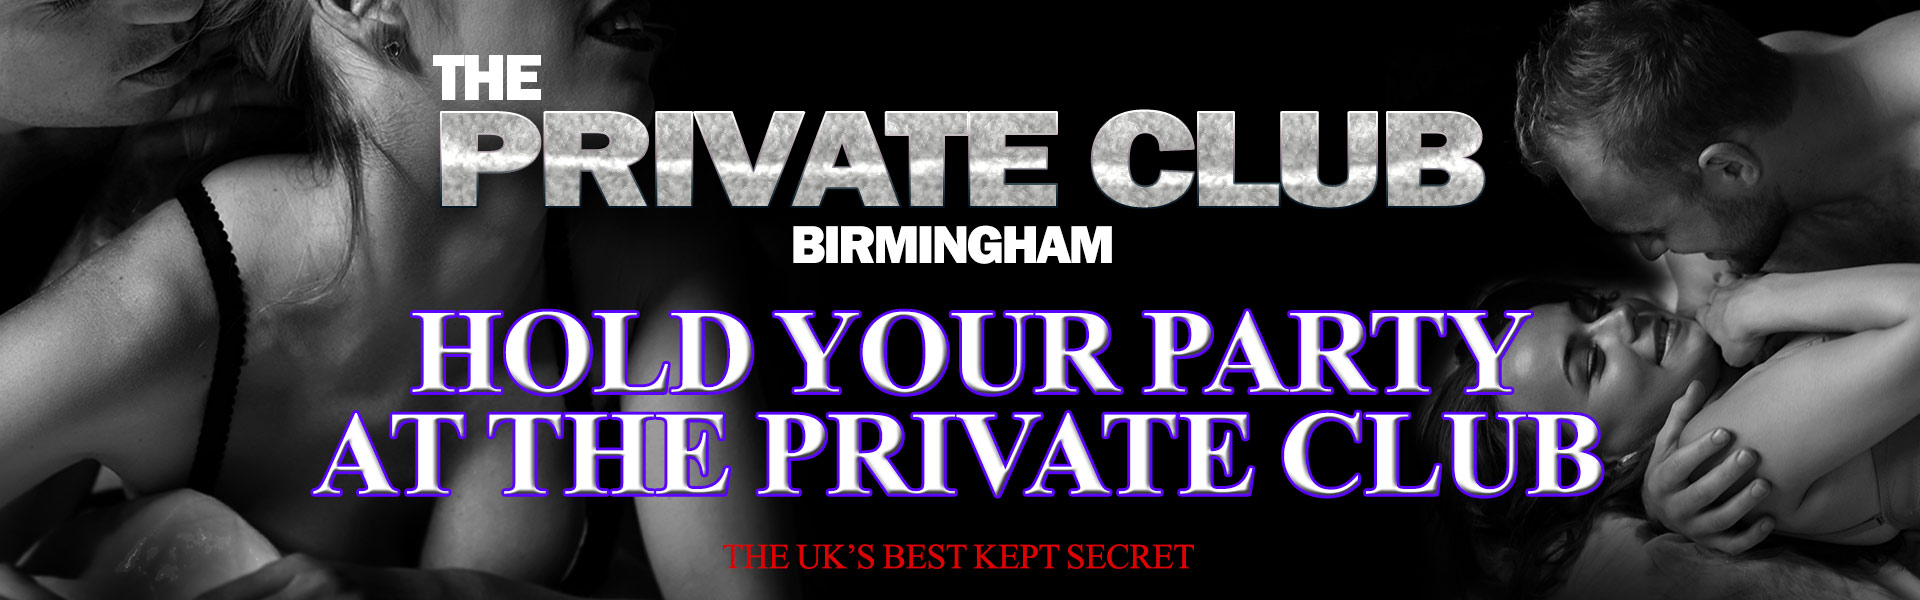 hold-your-party-at-the-private-club